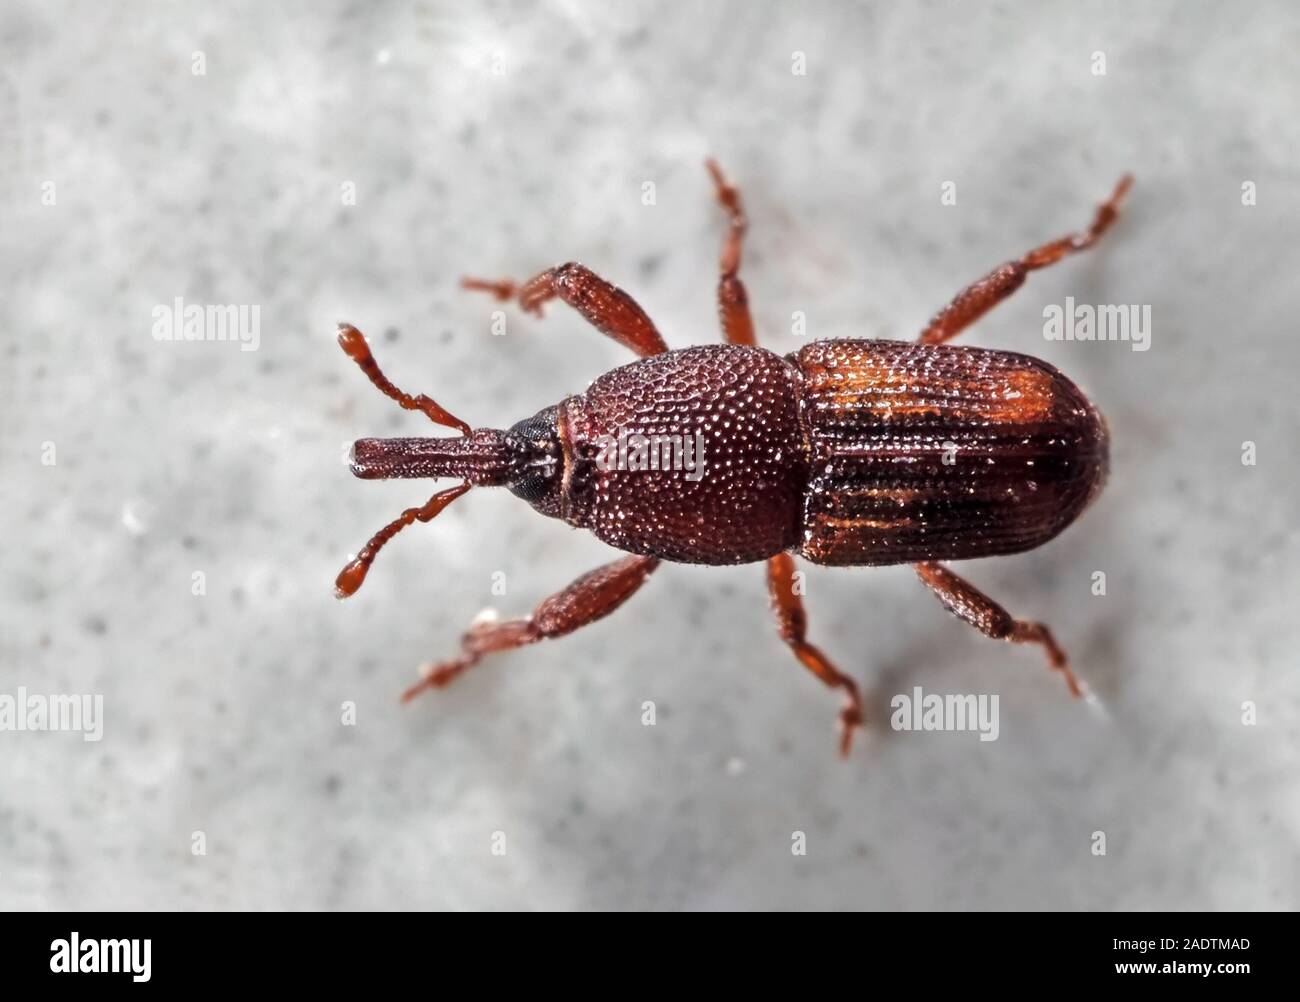 Macro Photography of Rice Weevil or Sitophilus oryzae on The Floor Stock Photo